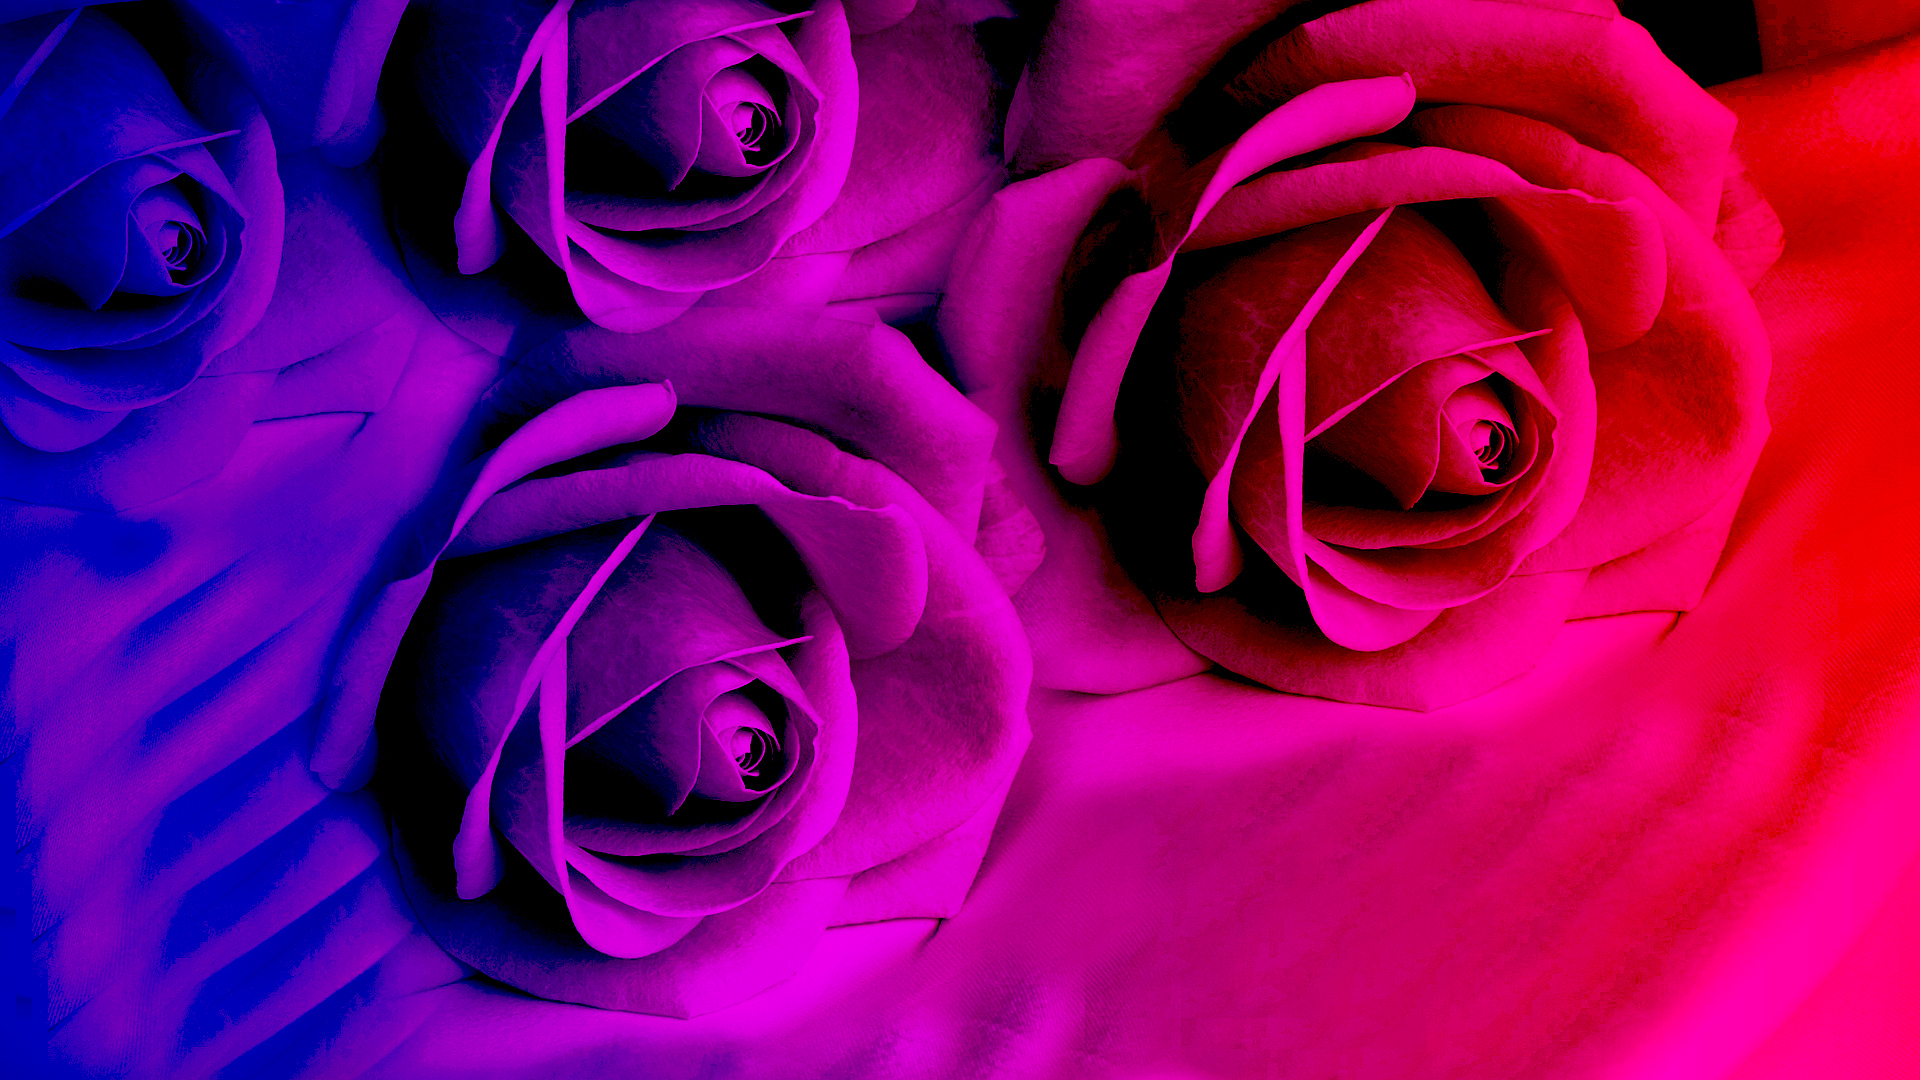 Purple Roses In Bright Color Wallpaper And Image